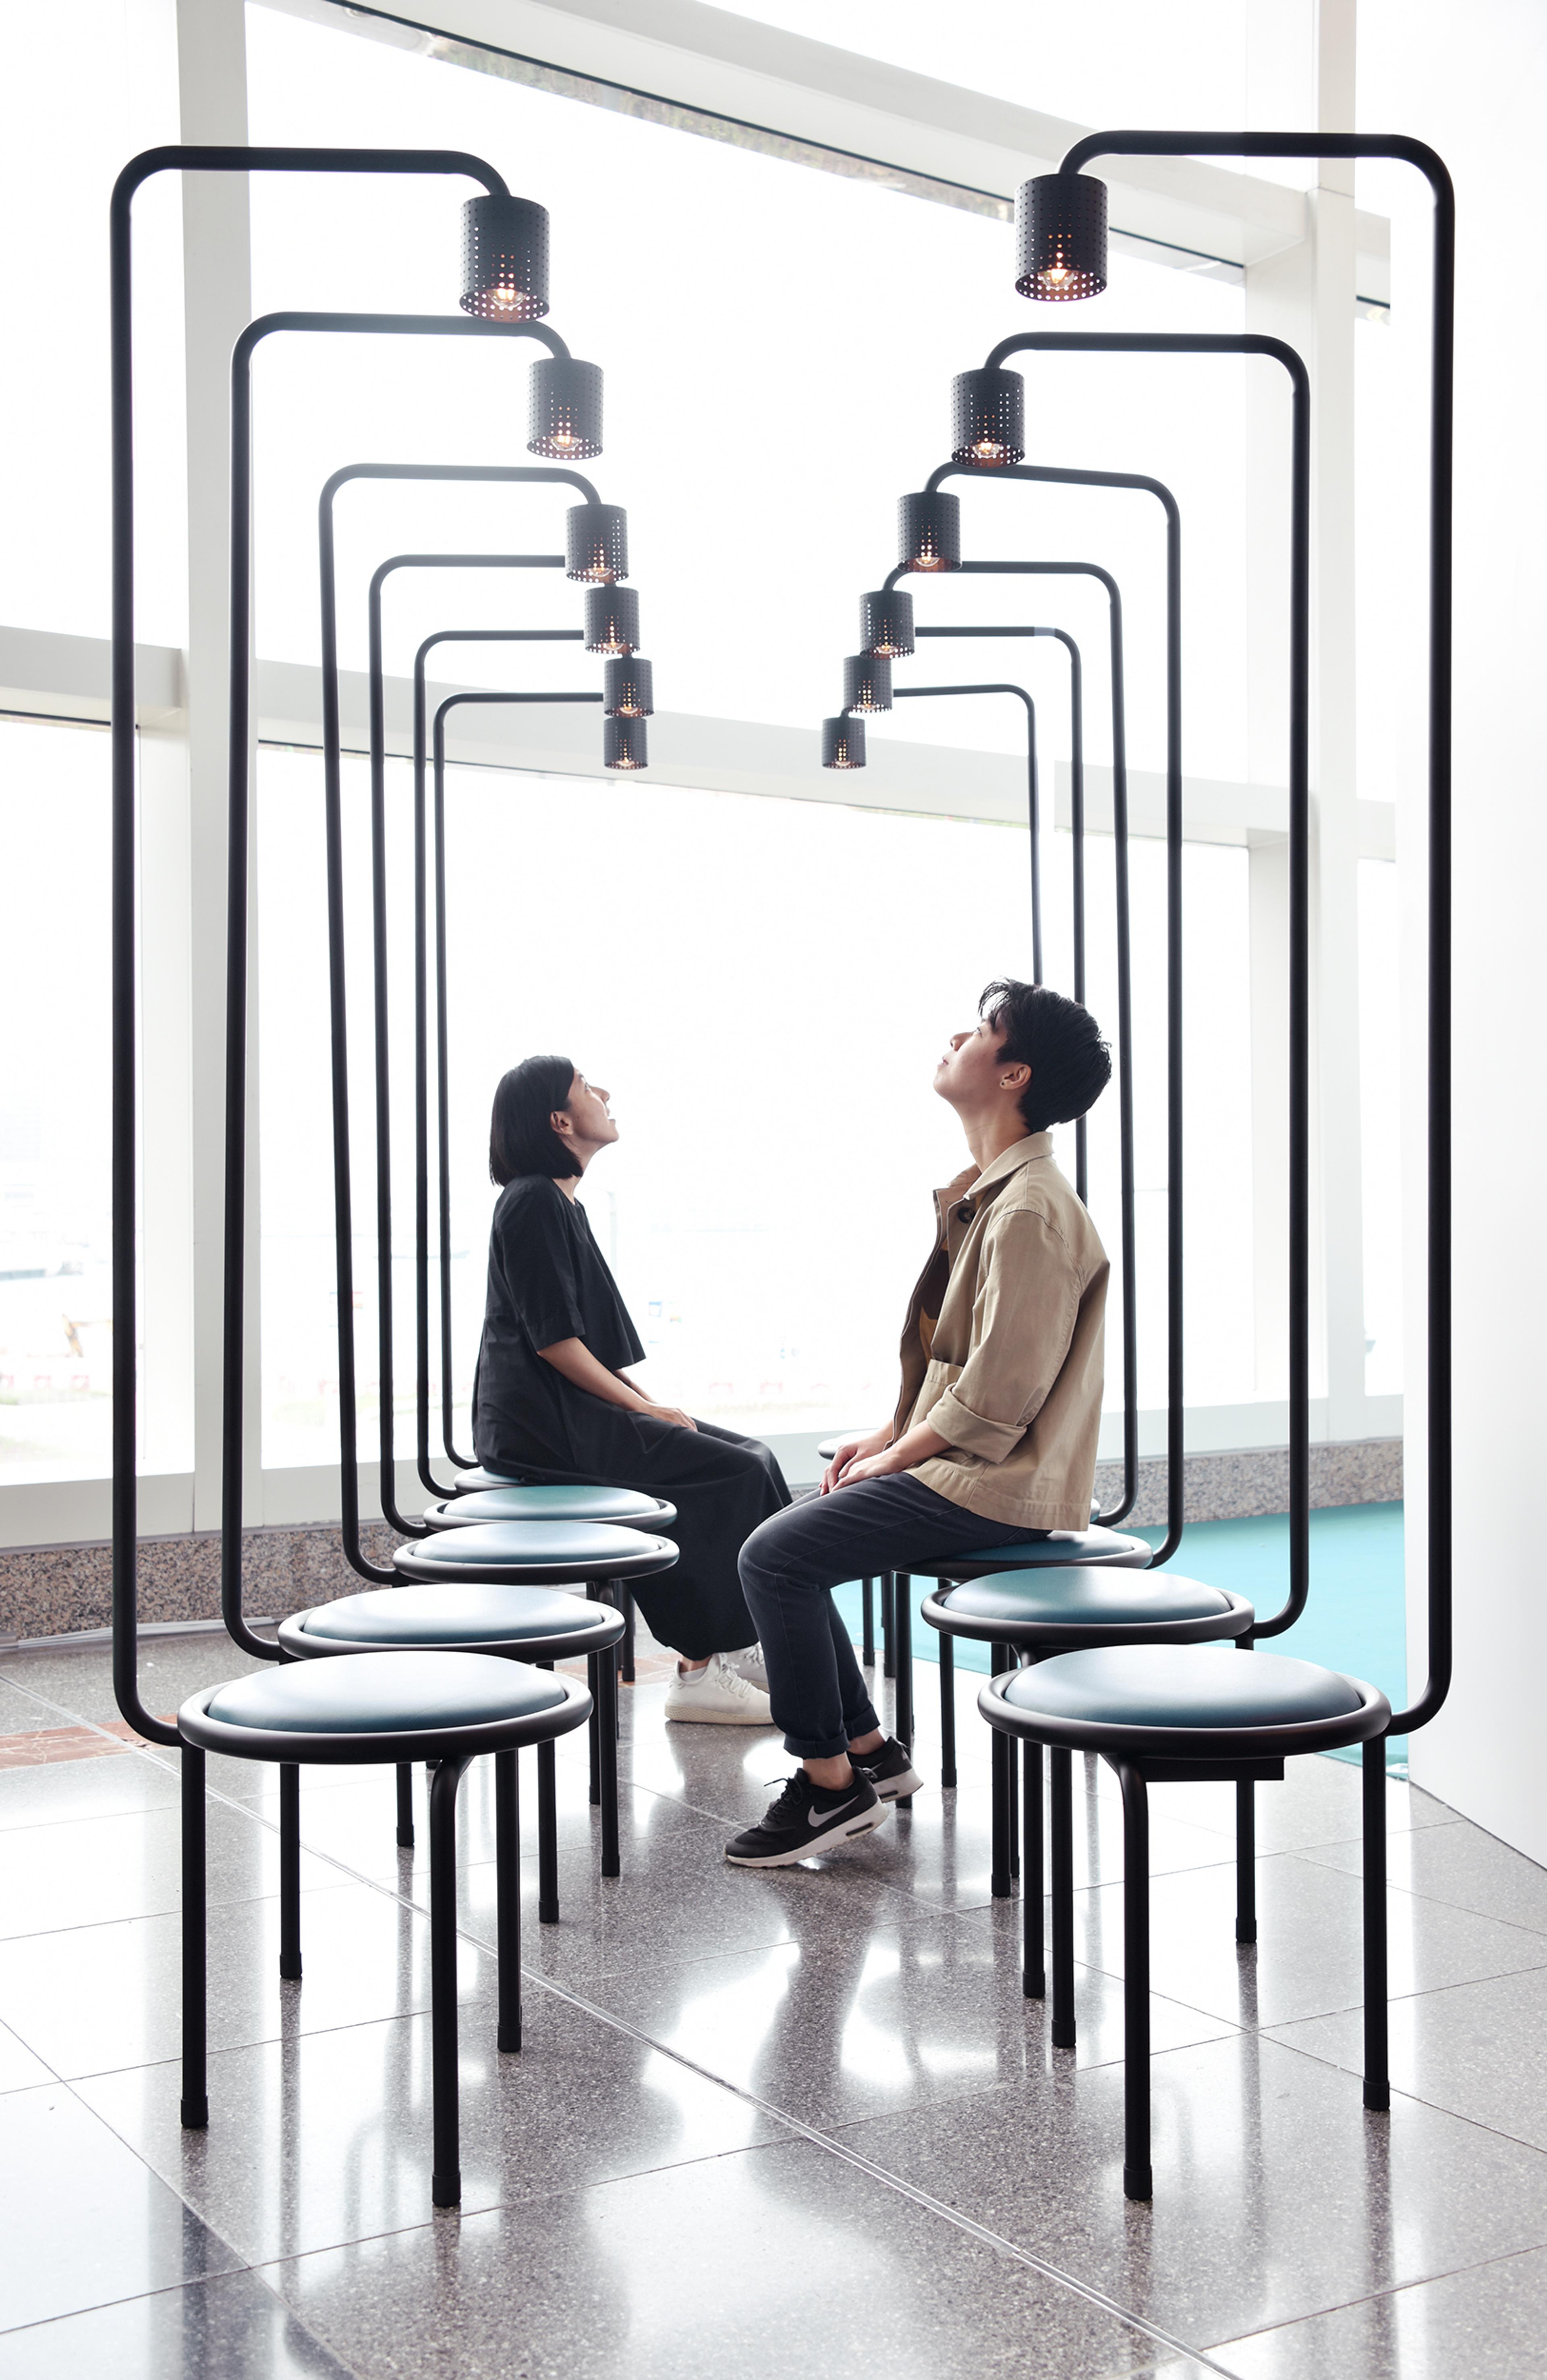 Photograph of two people sitting in art installation of stools with lights